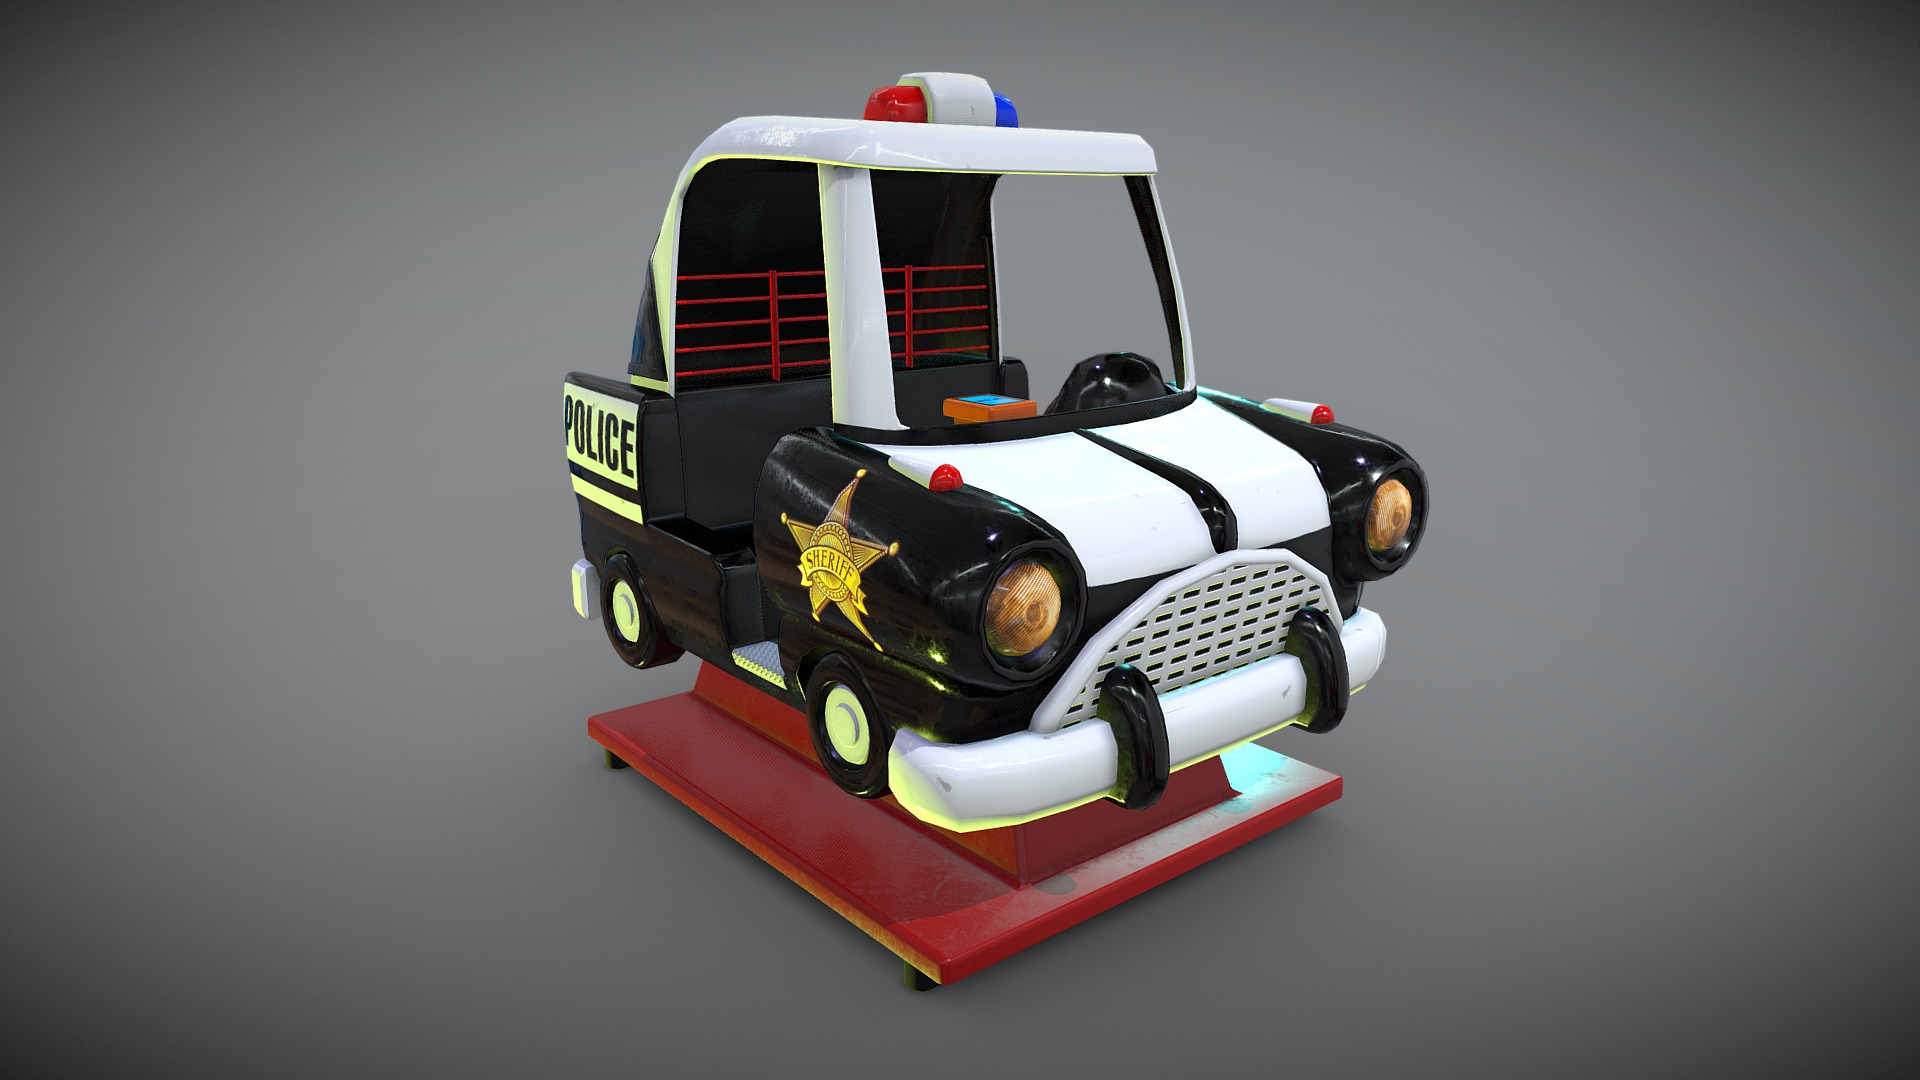 3D model Police Coin Operated Ride - This is a 3D model of the Police Coin Operated Ride. The 3D model is about a toy car on a table.